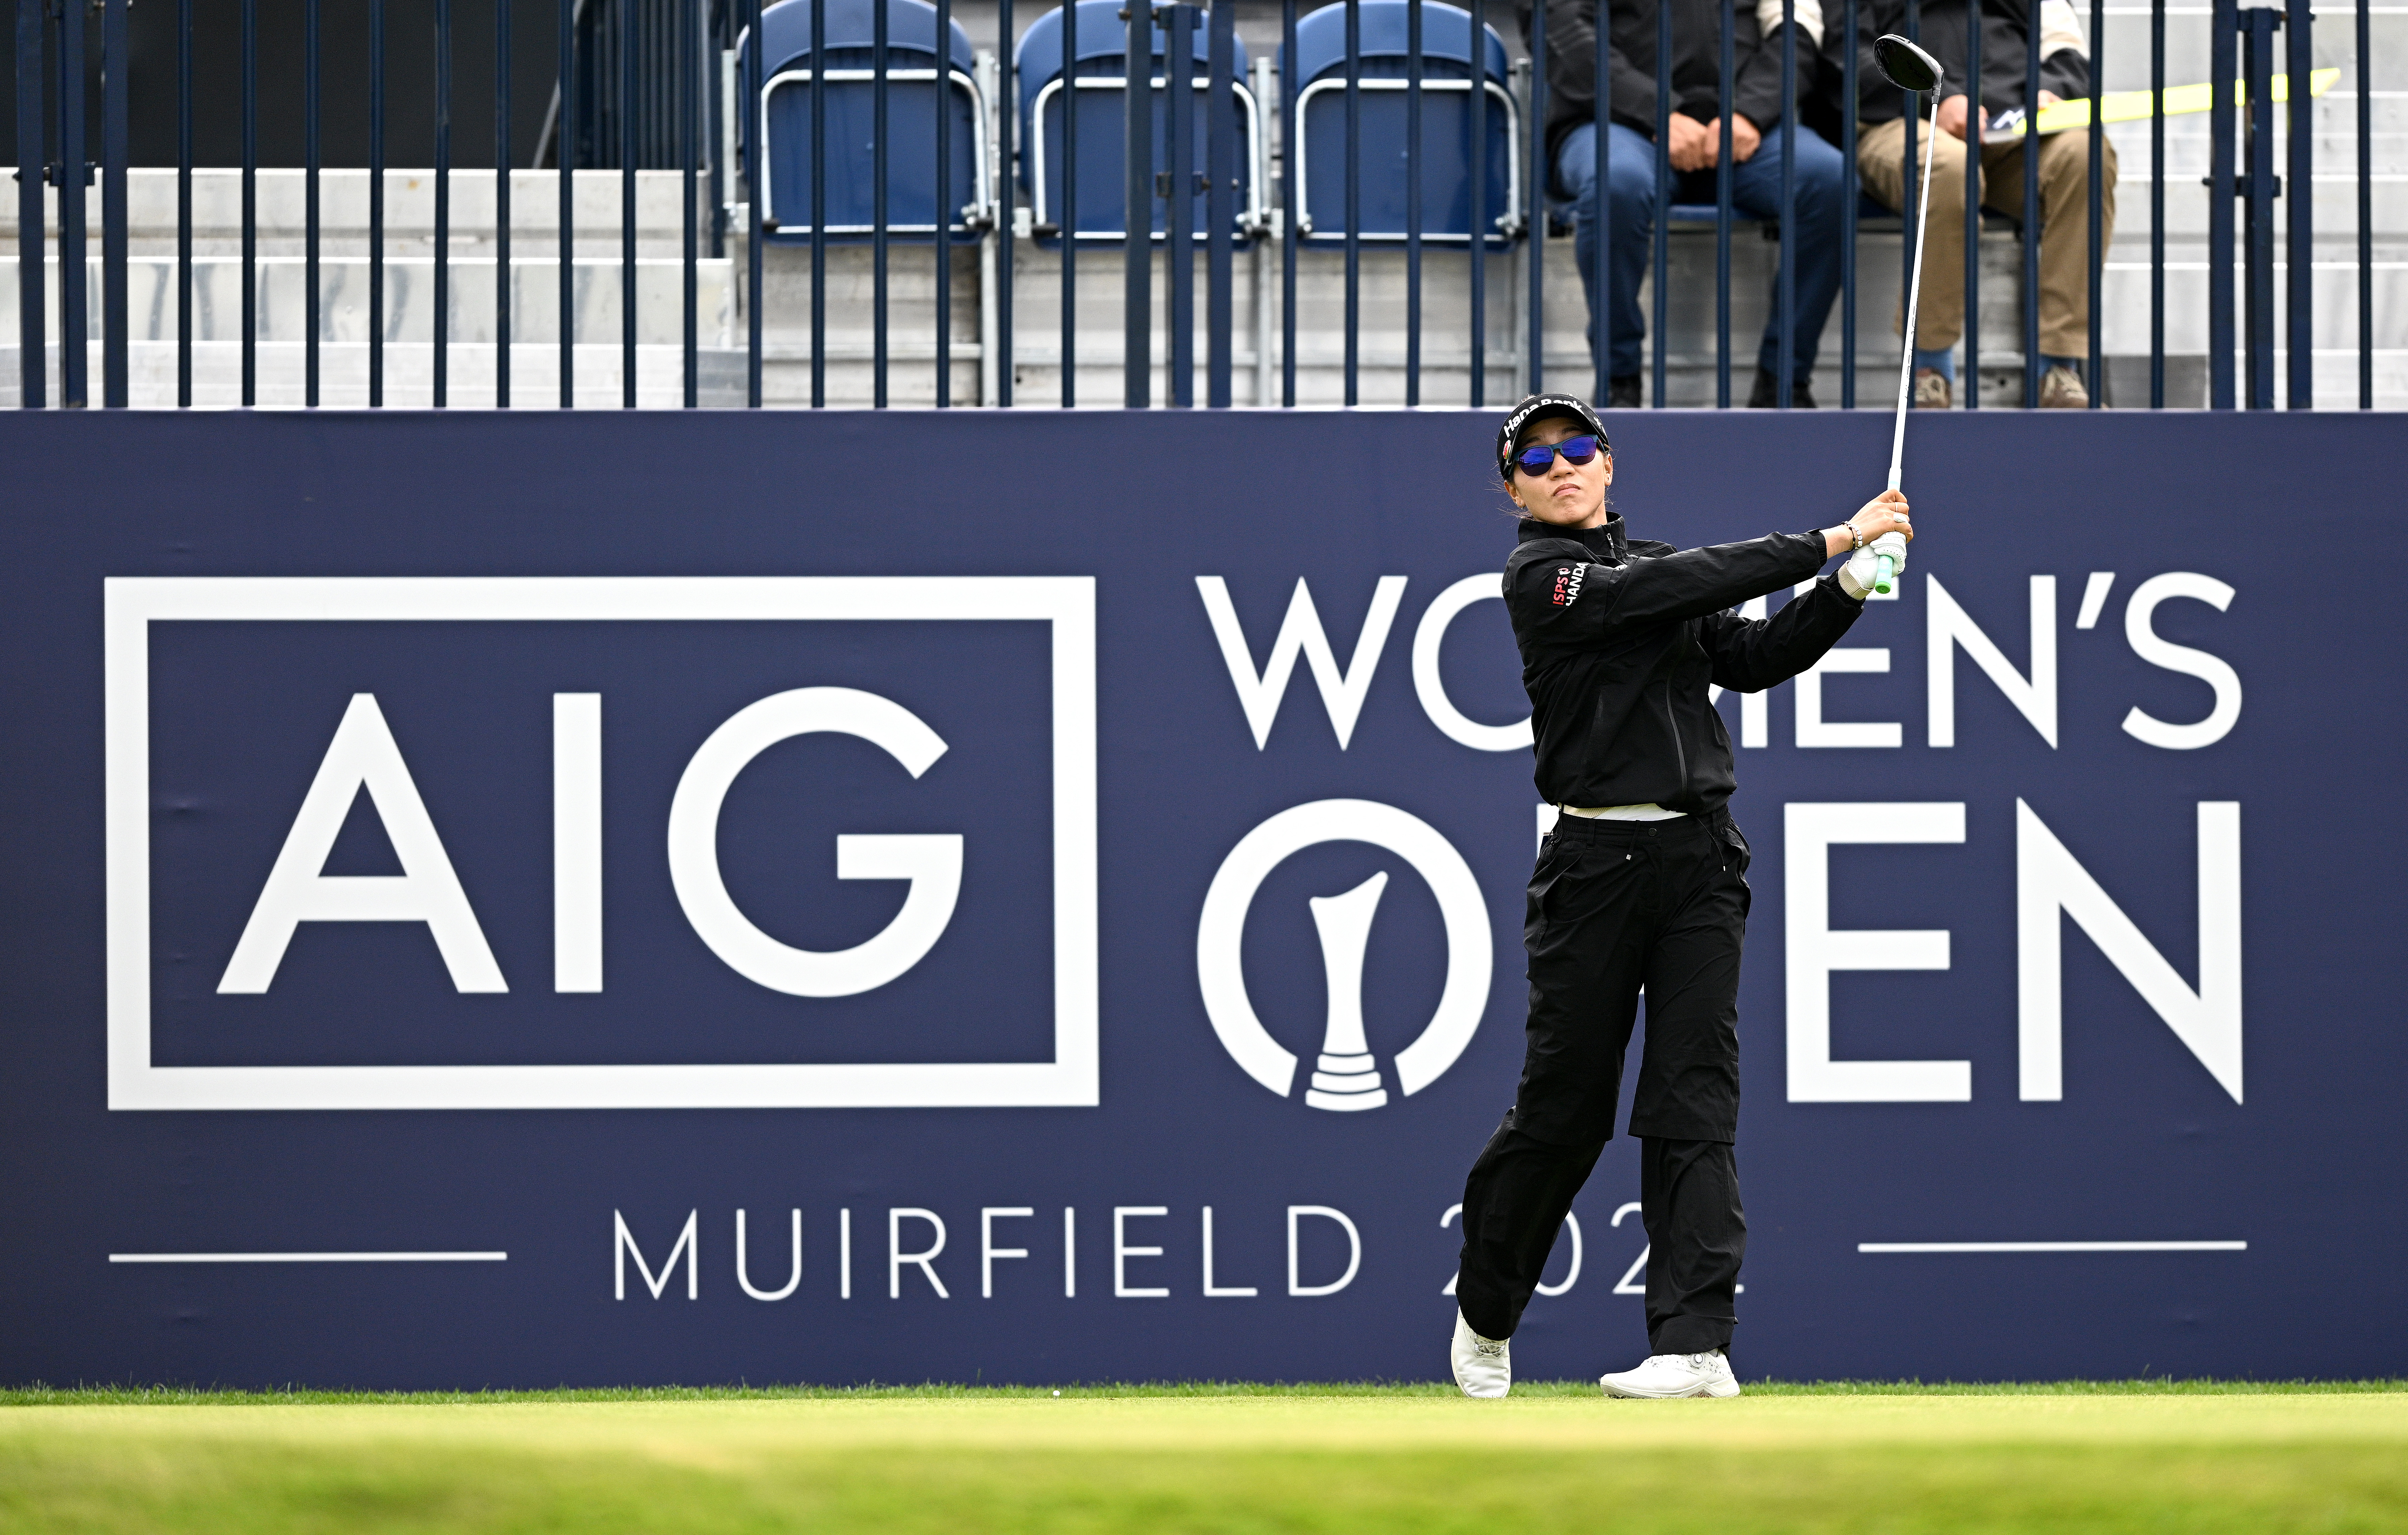 How to watch AIG Womens Open